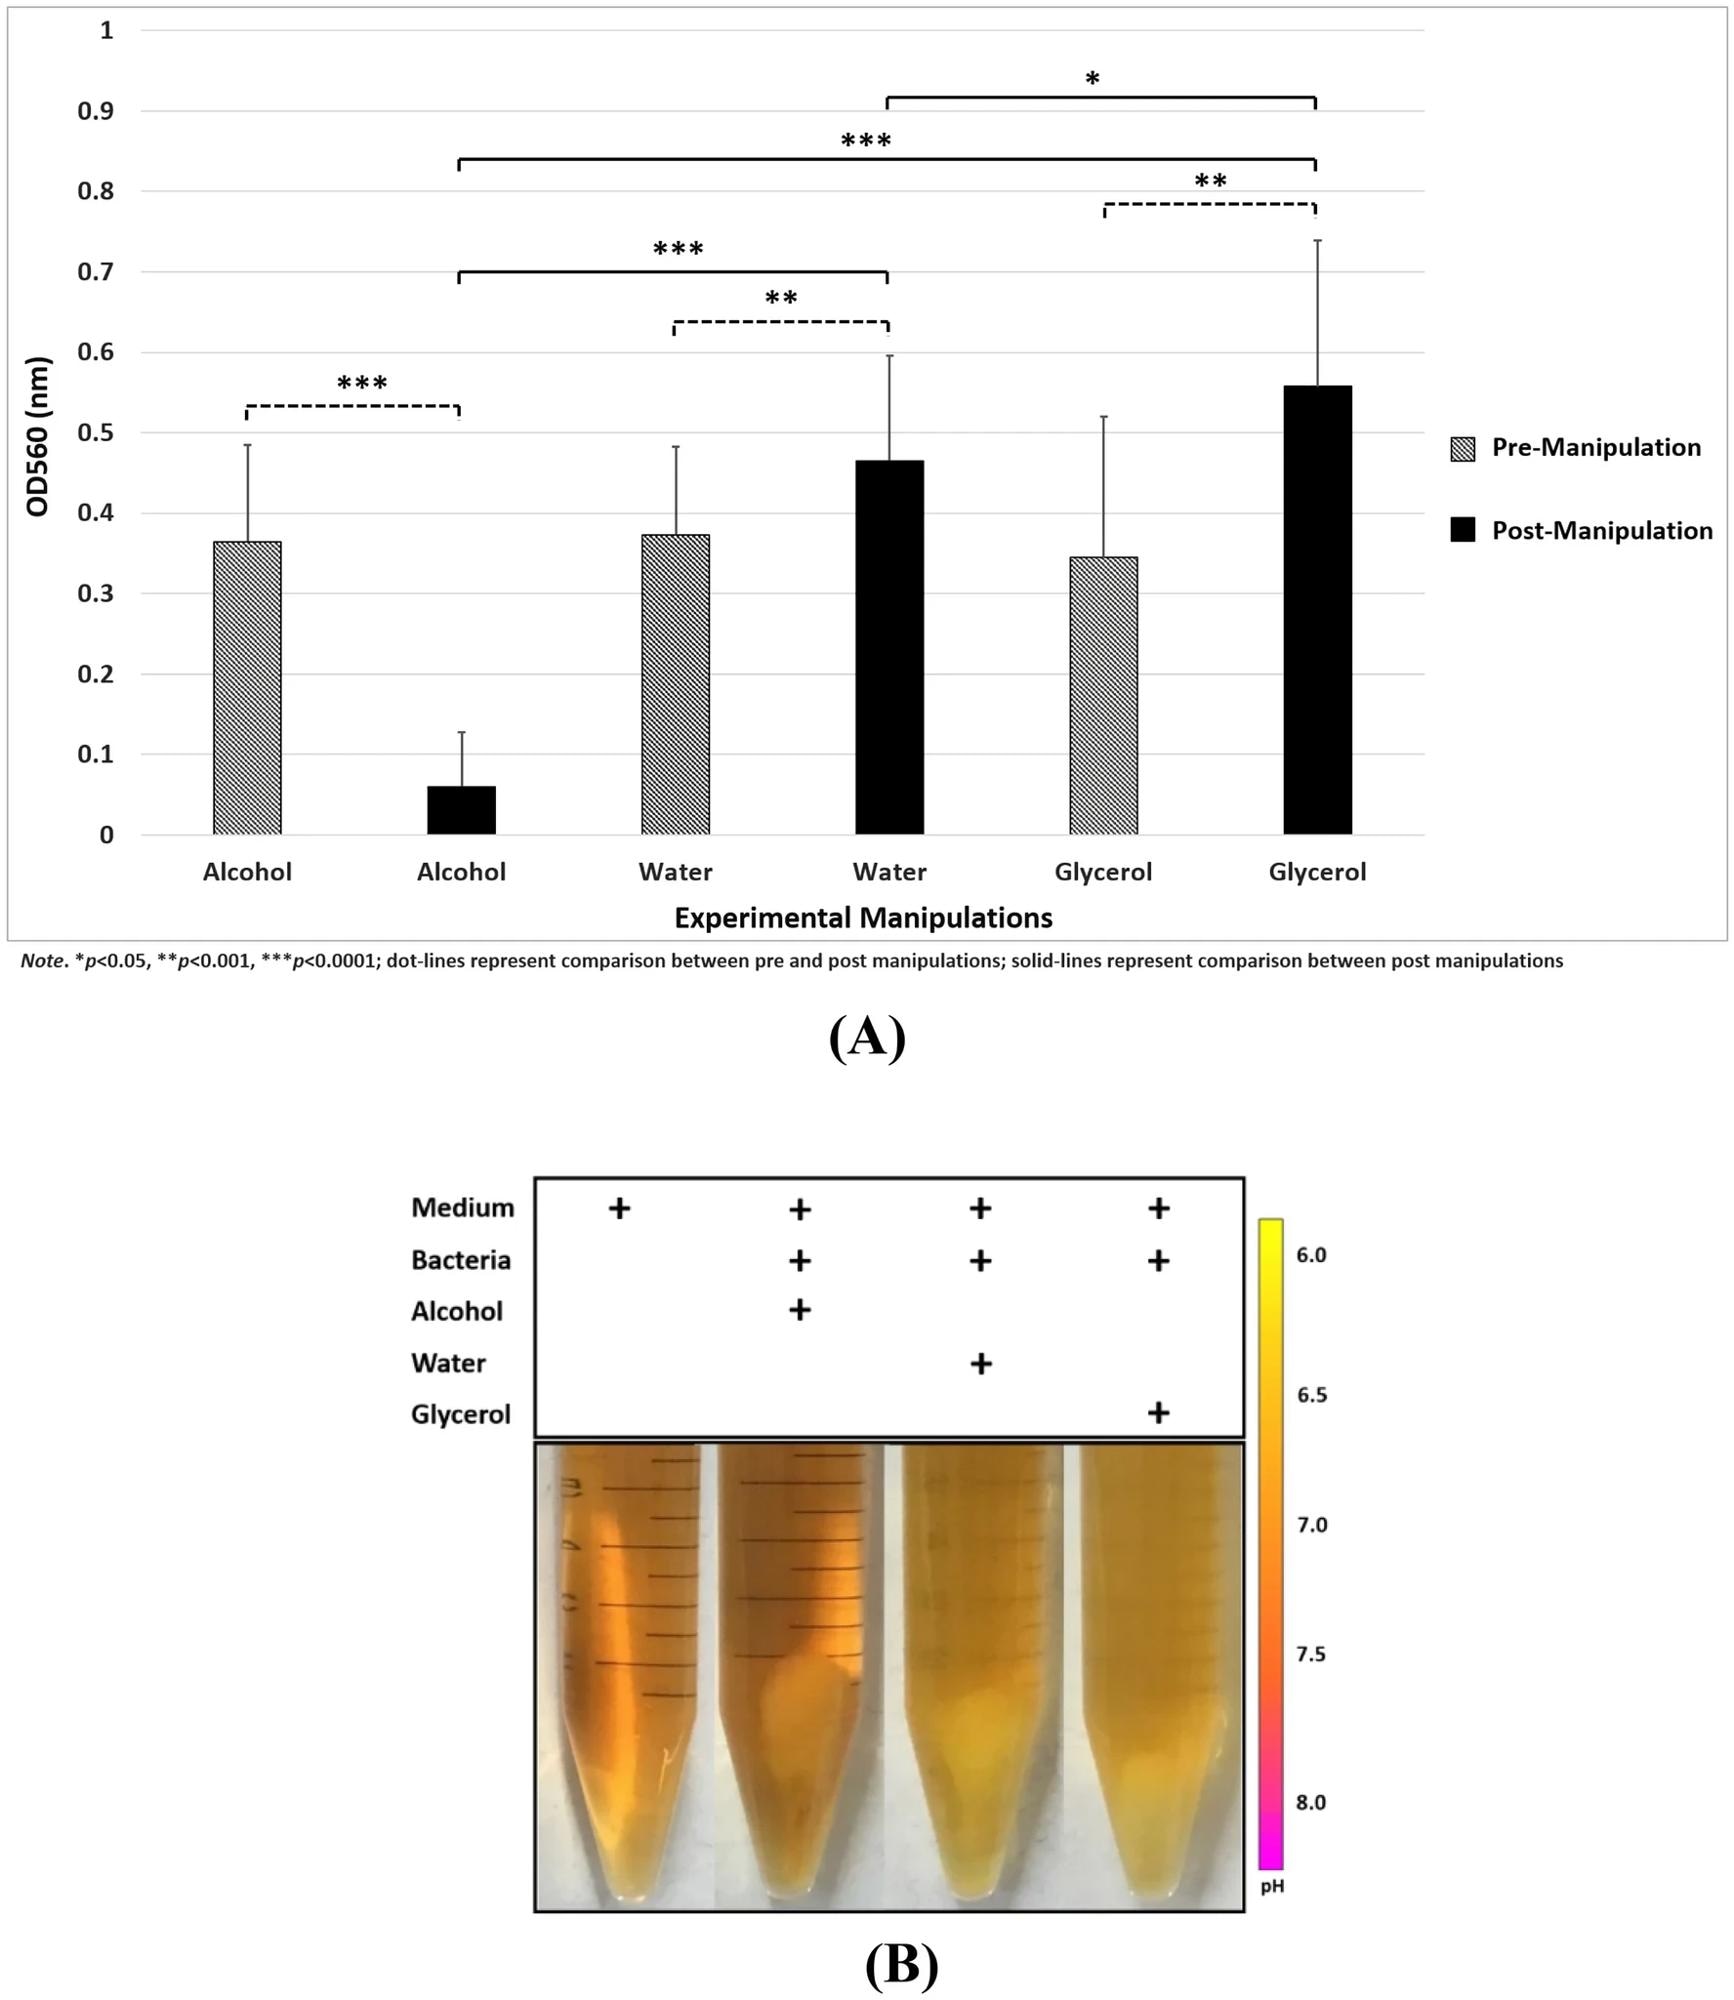 (A) Significant effects of experimental manipulations on bacteria population; (B) Color changes after experimental manipulations indicated bacterial fermentation.